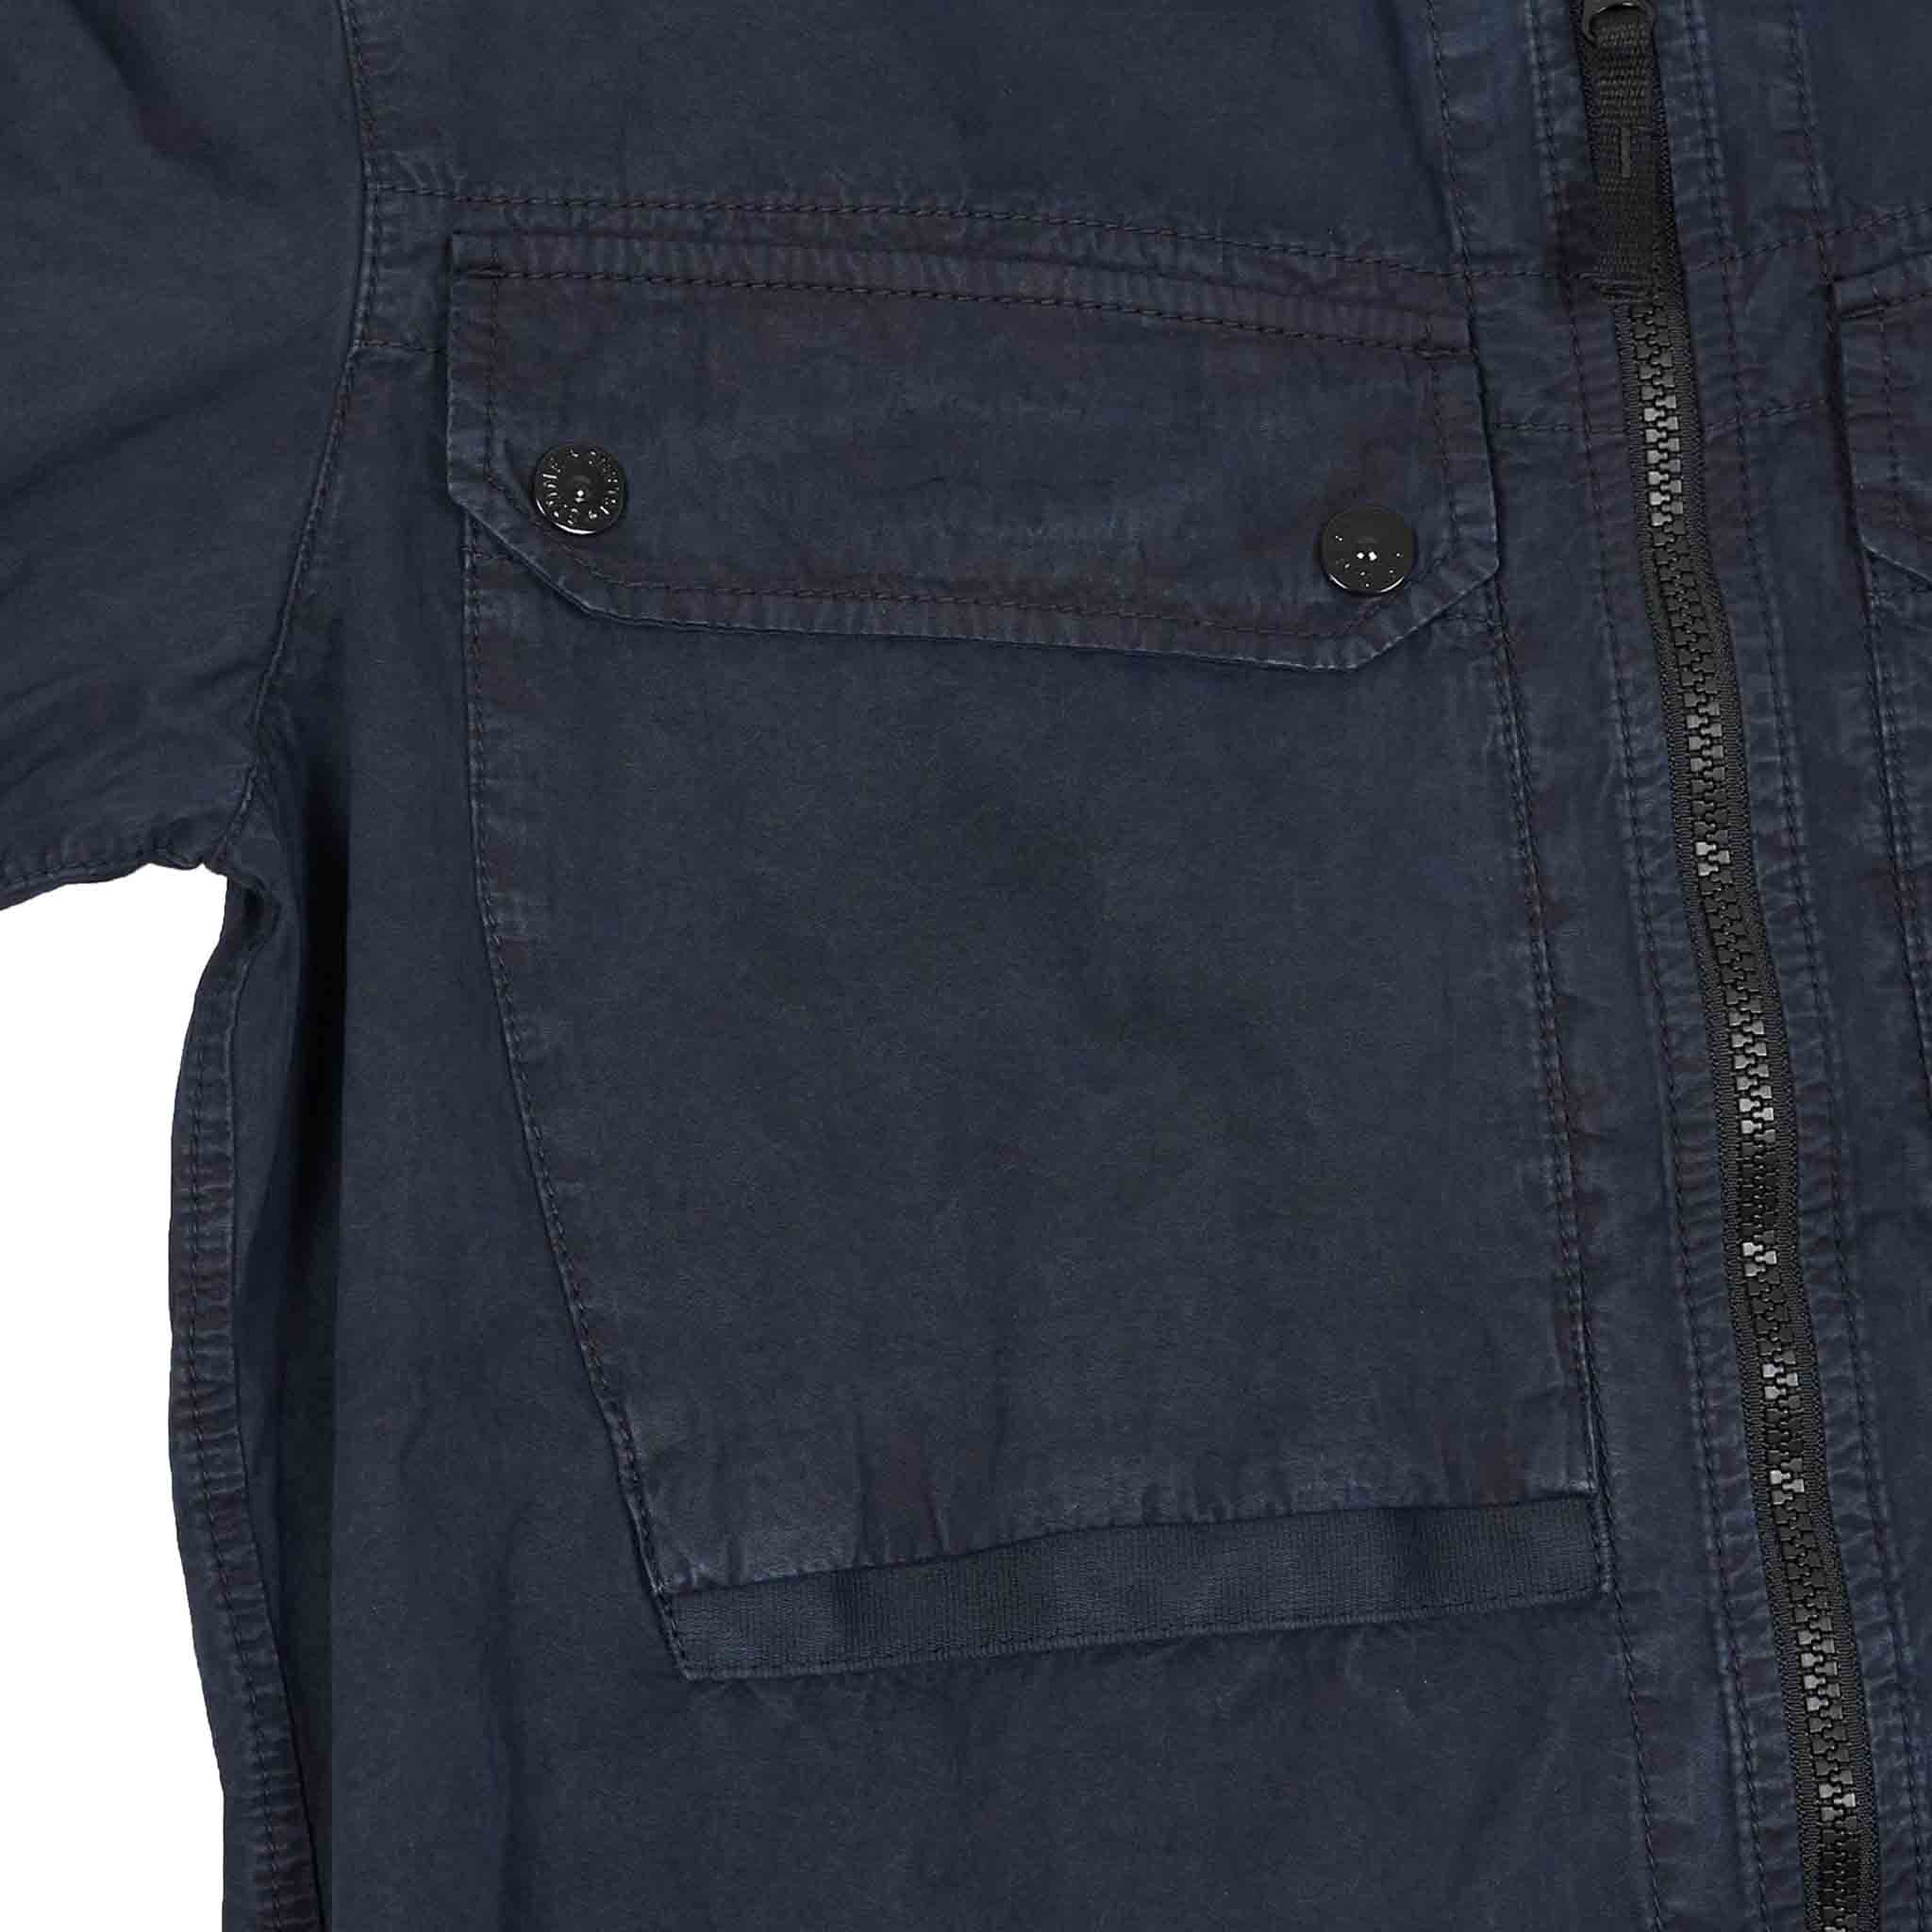 Stone Island Garment Dyed "Old" Treatment Cotton Overshirt in Navy